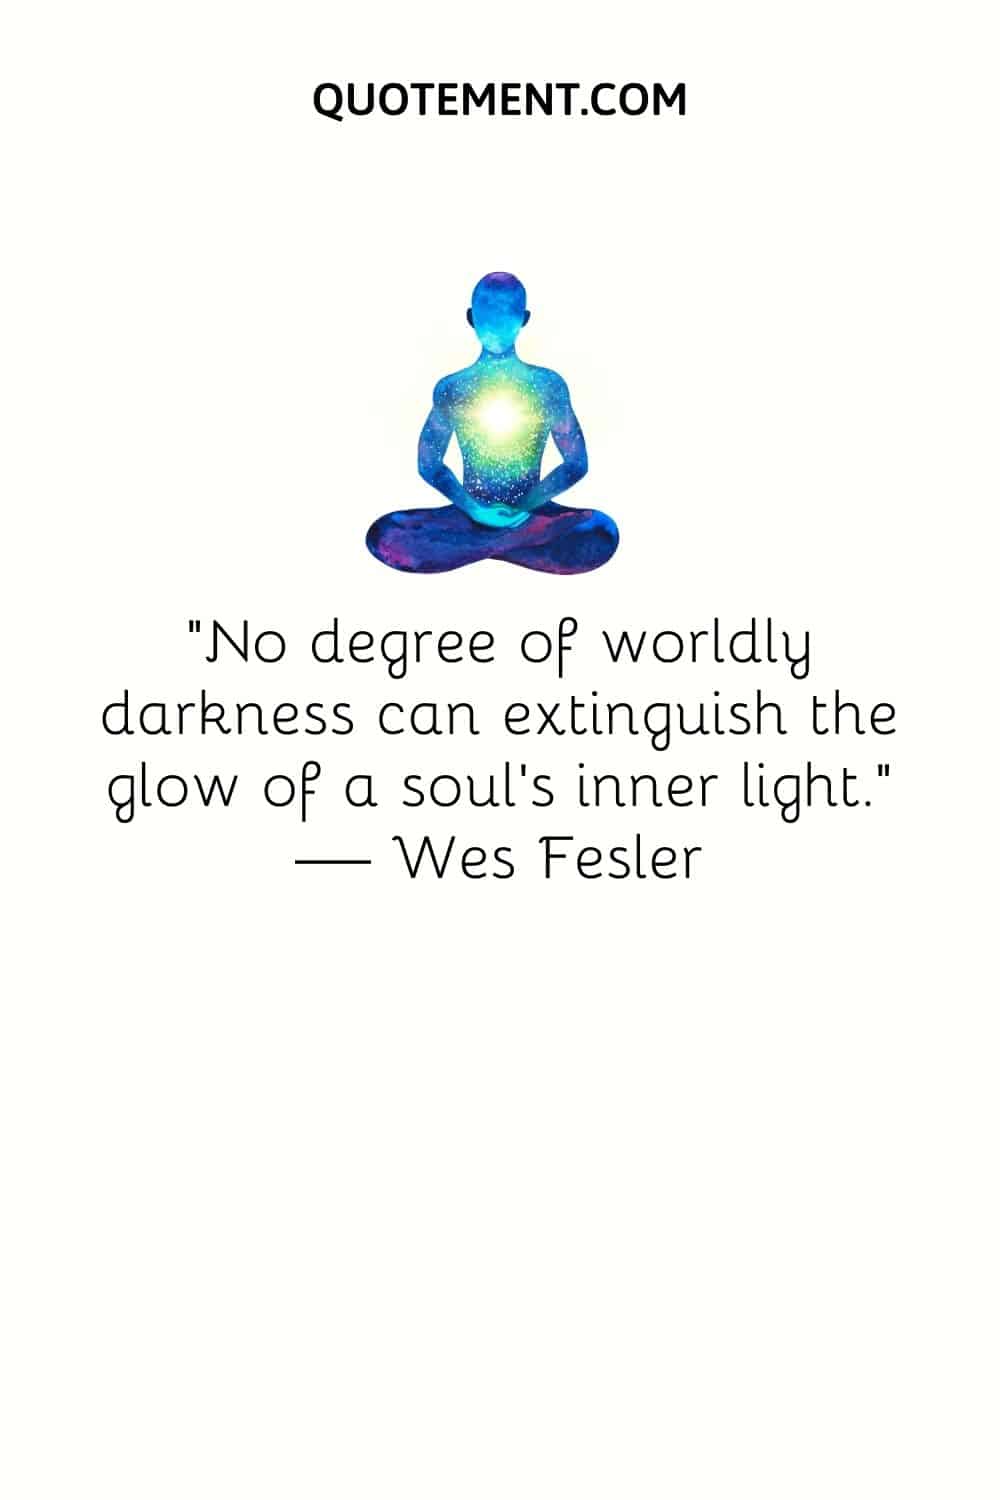 “No degree of worldly darkness can extinguish the glow of a soul’s inner light.“ — Wes Fesler